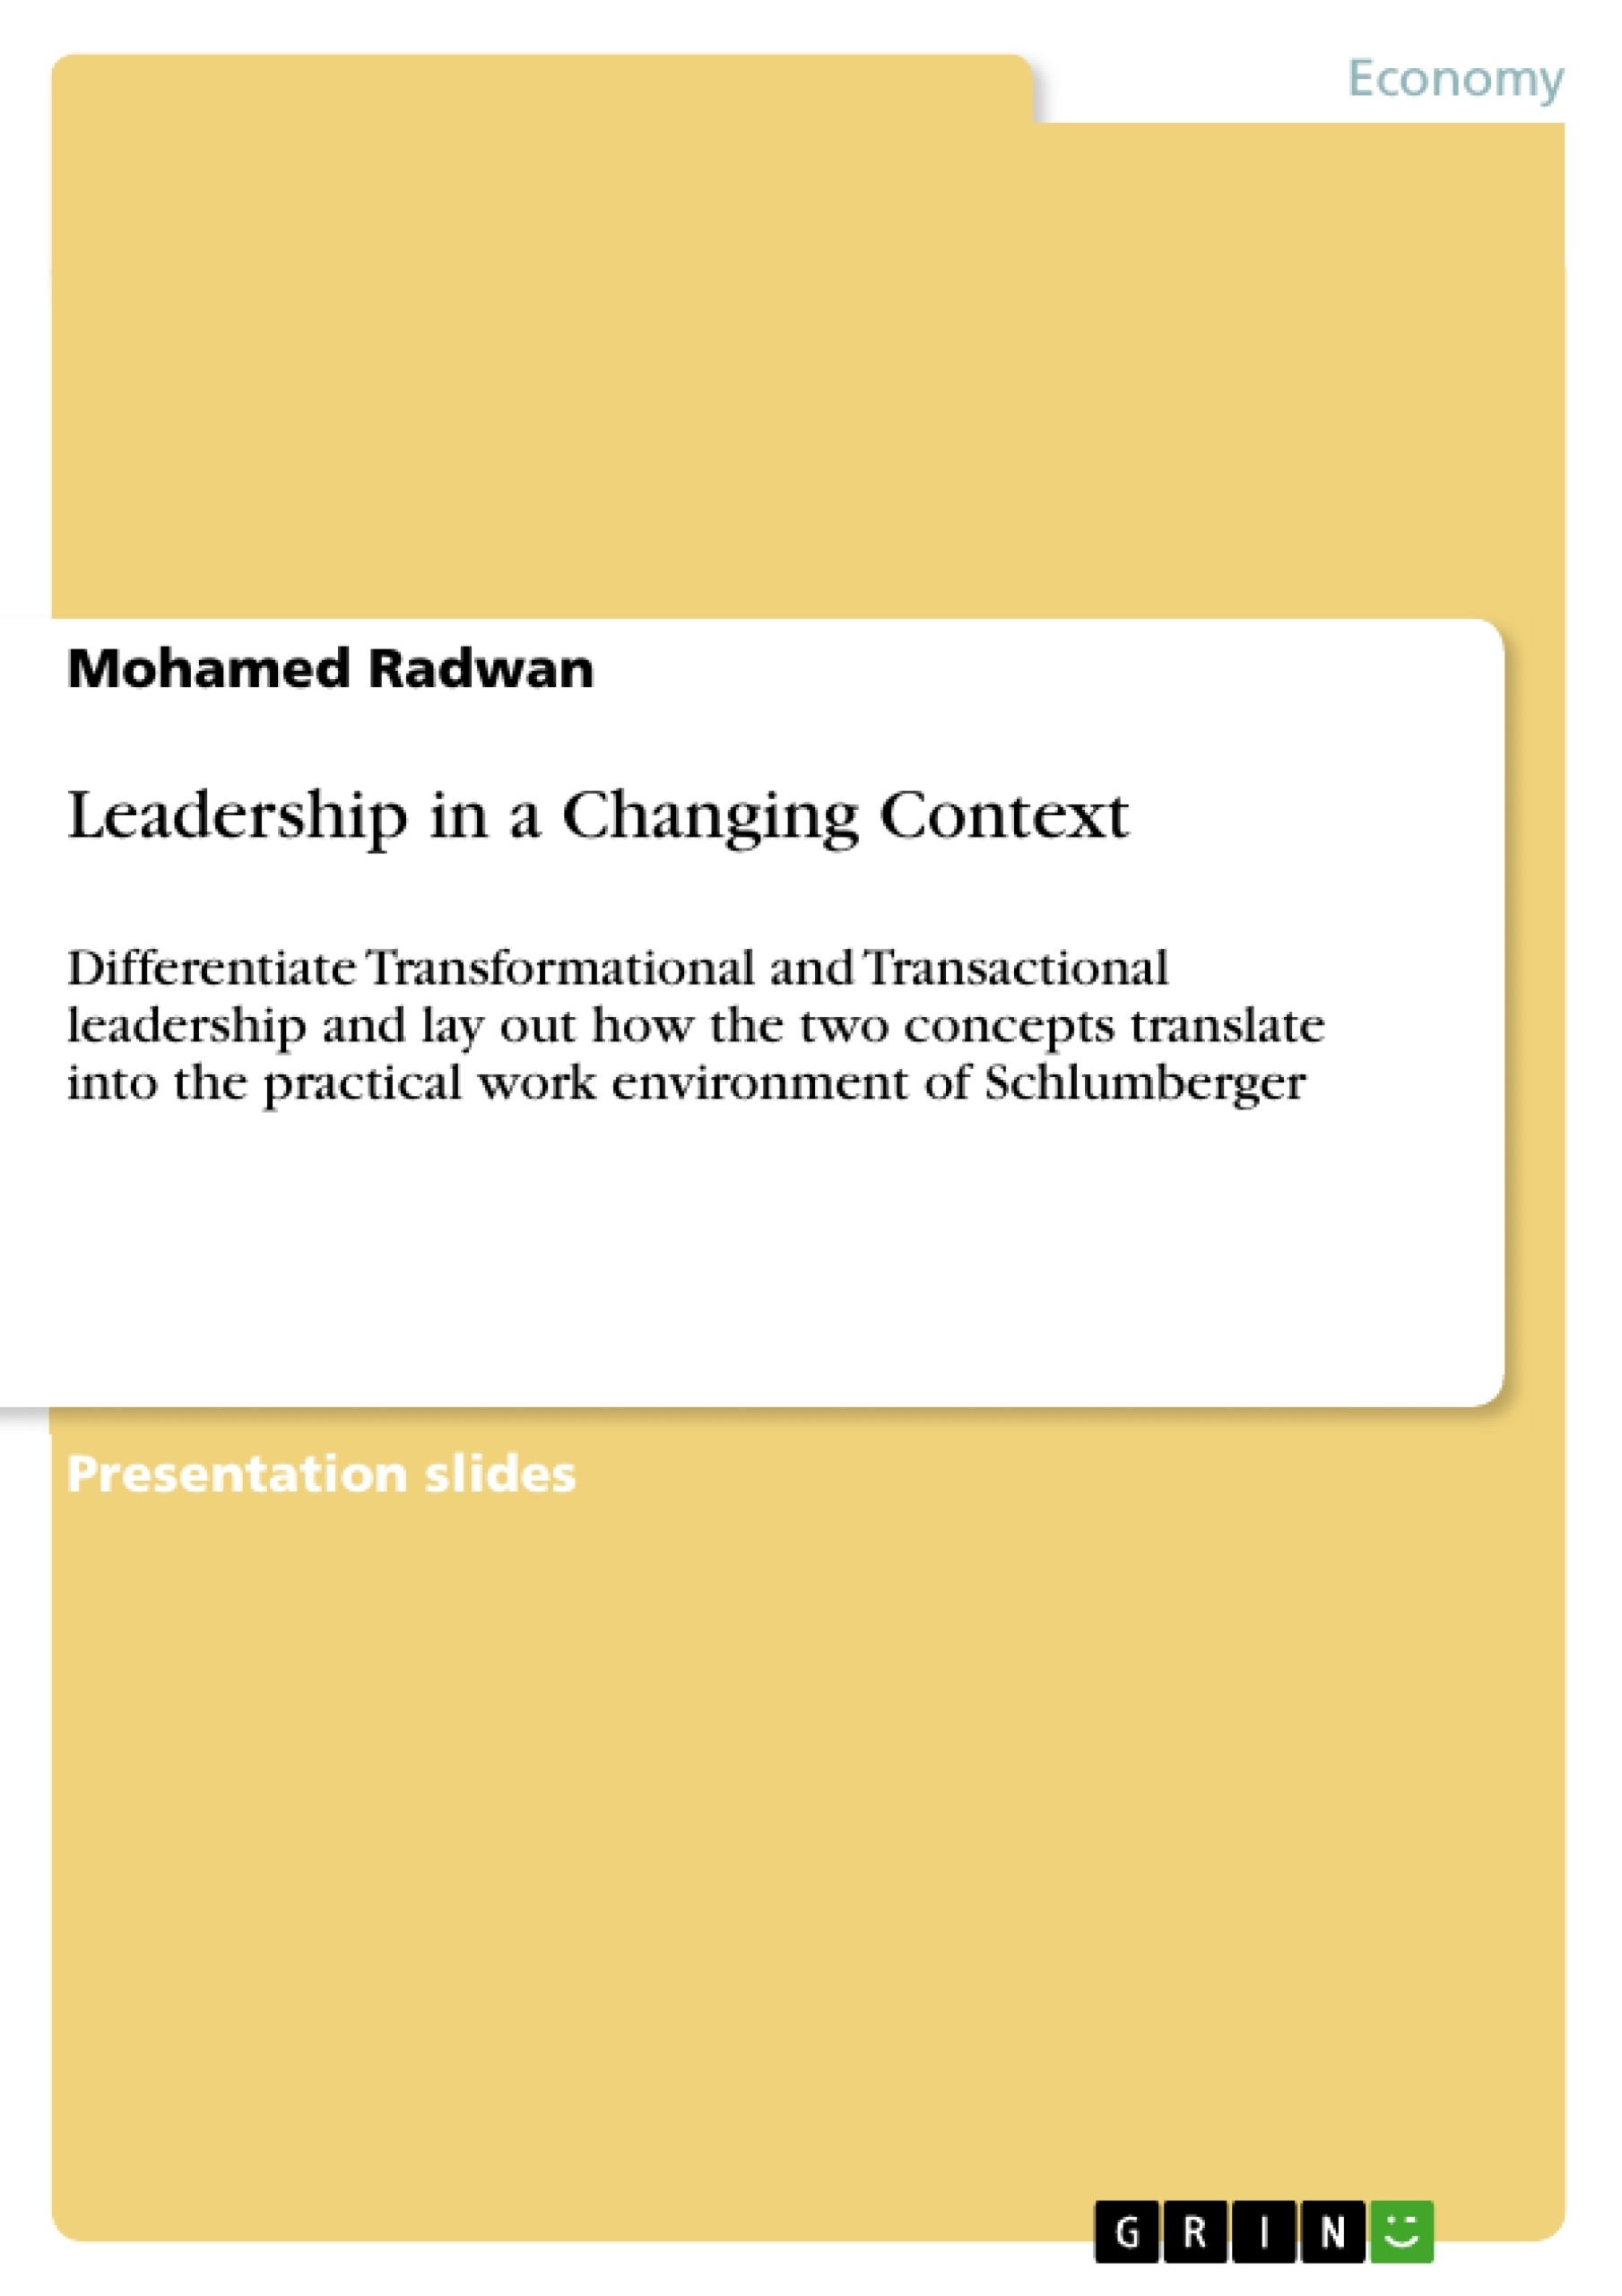 Title: Leadership in a Changing Context